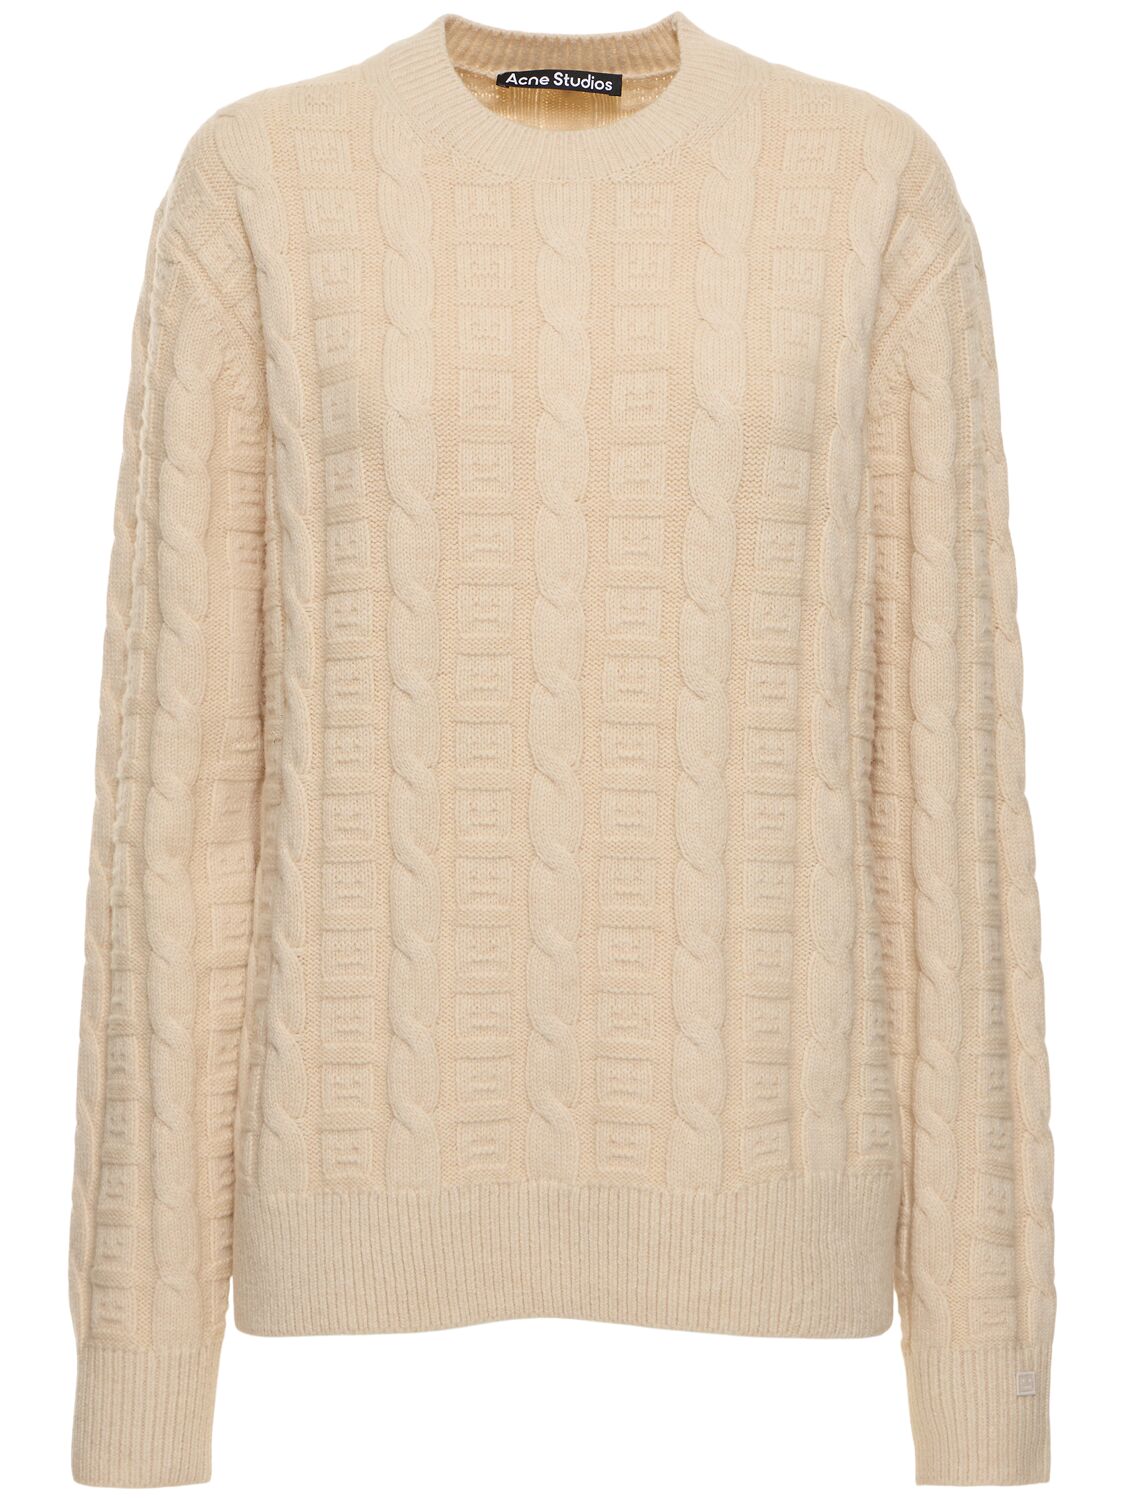 Acne Studios Wool Blend Cable Knit Sweater In Beige